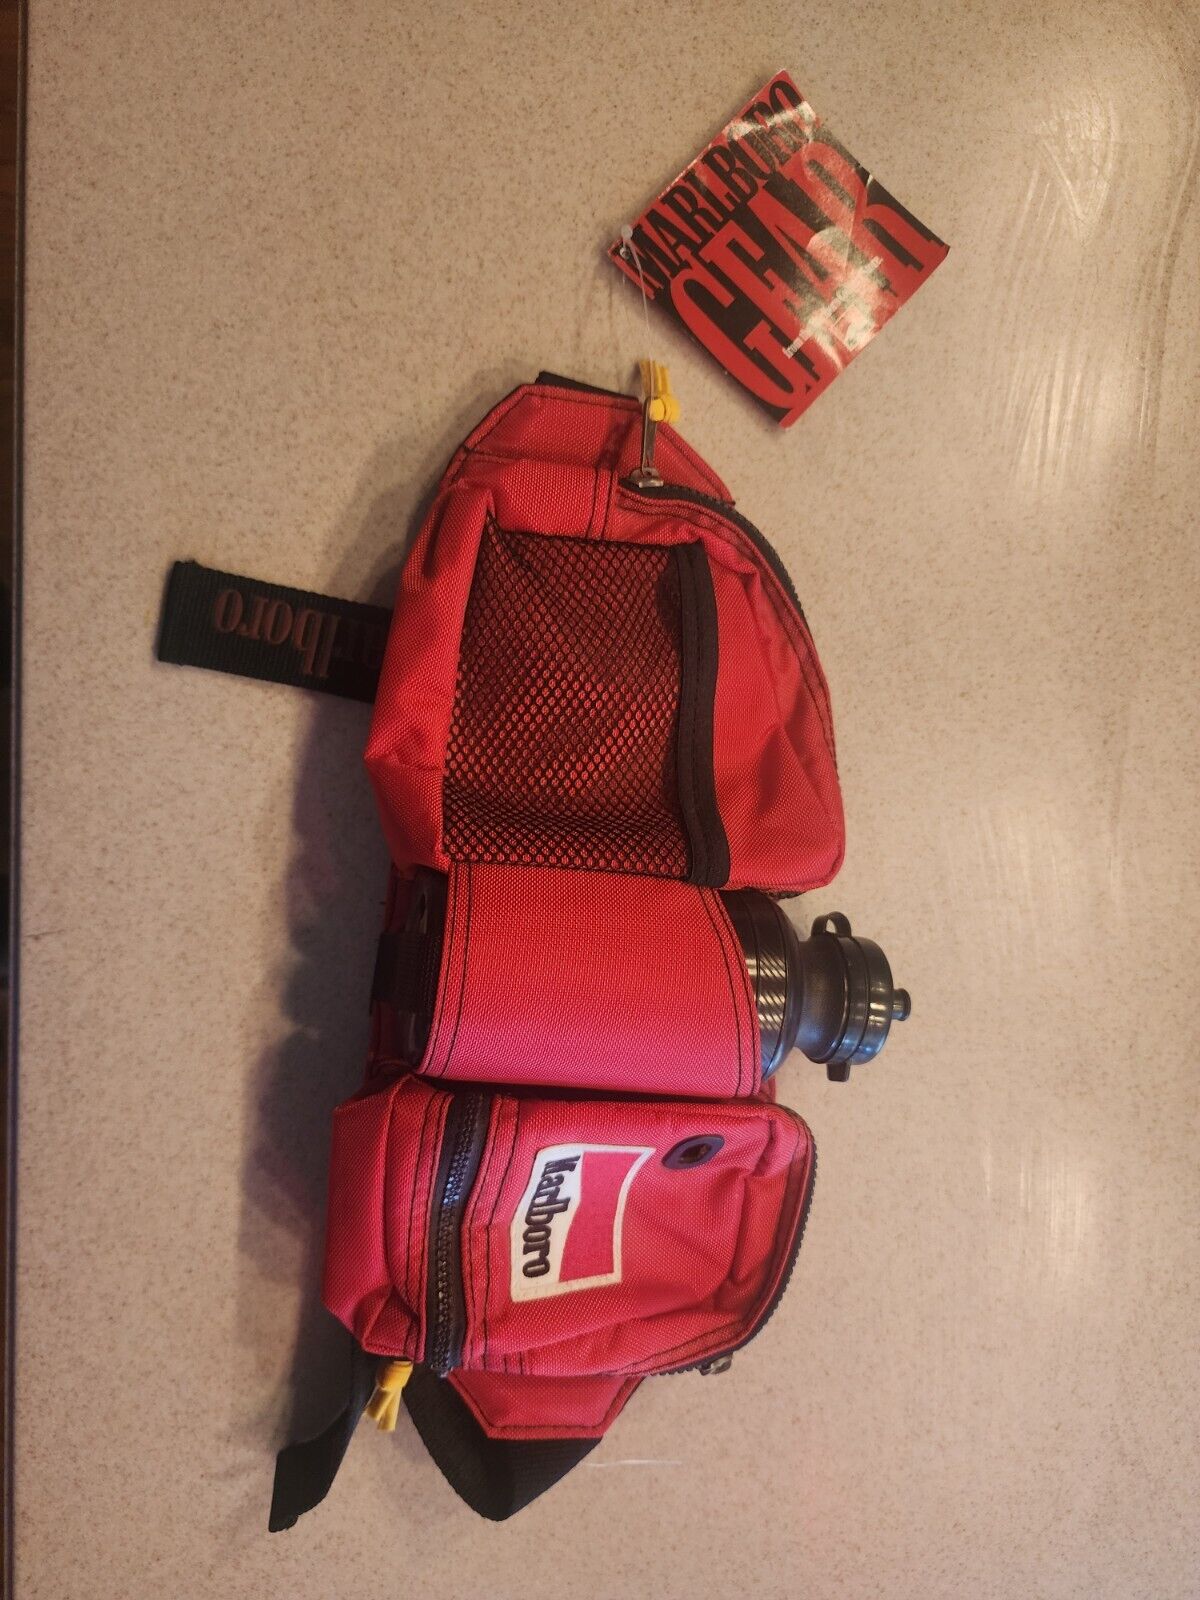 Marlboro Gear Fanny Pack Red, Camping Hiking Utility Pouch Waist Belt Bag 1990s